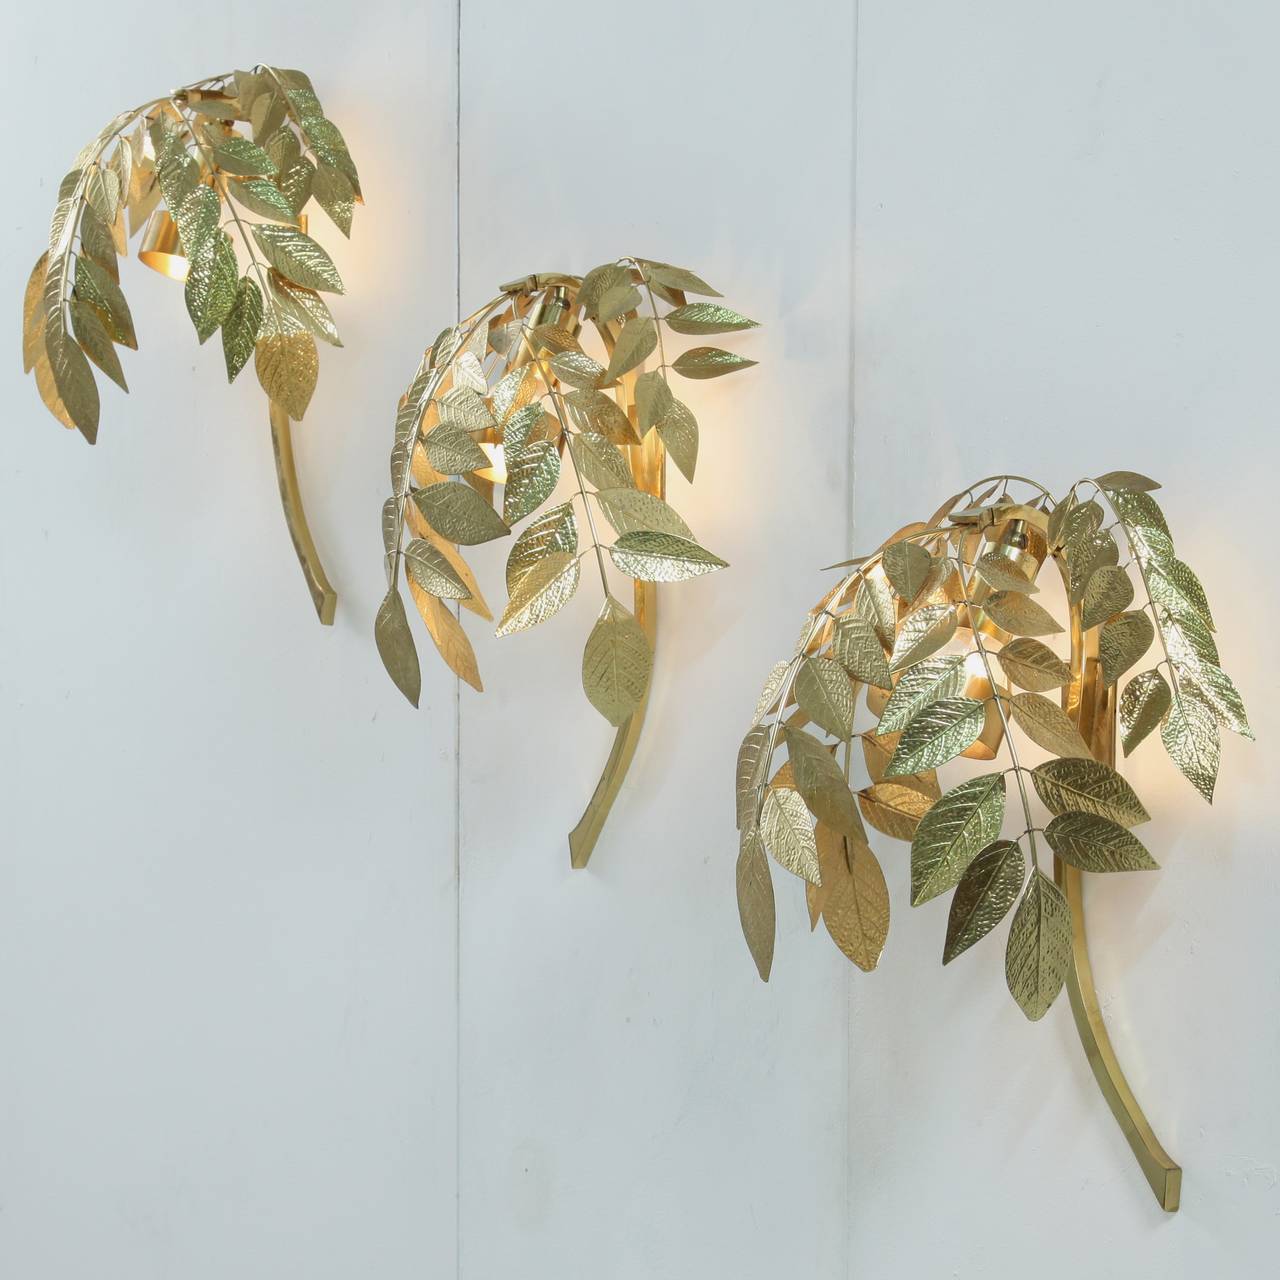 A set of three wall appliques that appear like brass coated tree branches with leaves.
The E27 light bulb is covered enough not to show and free enough to distribute the light through the leaves.